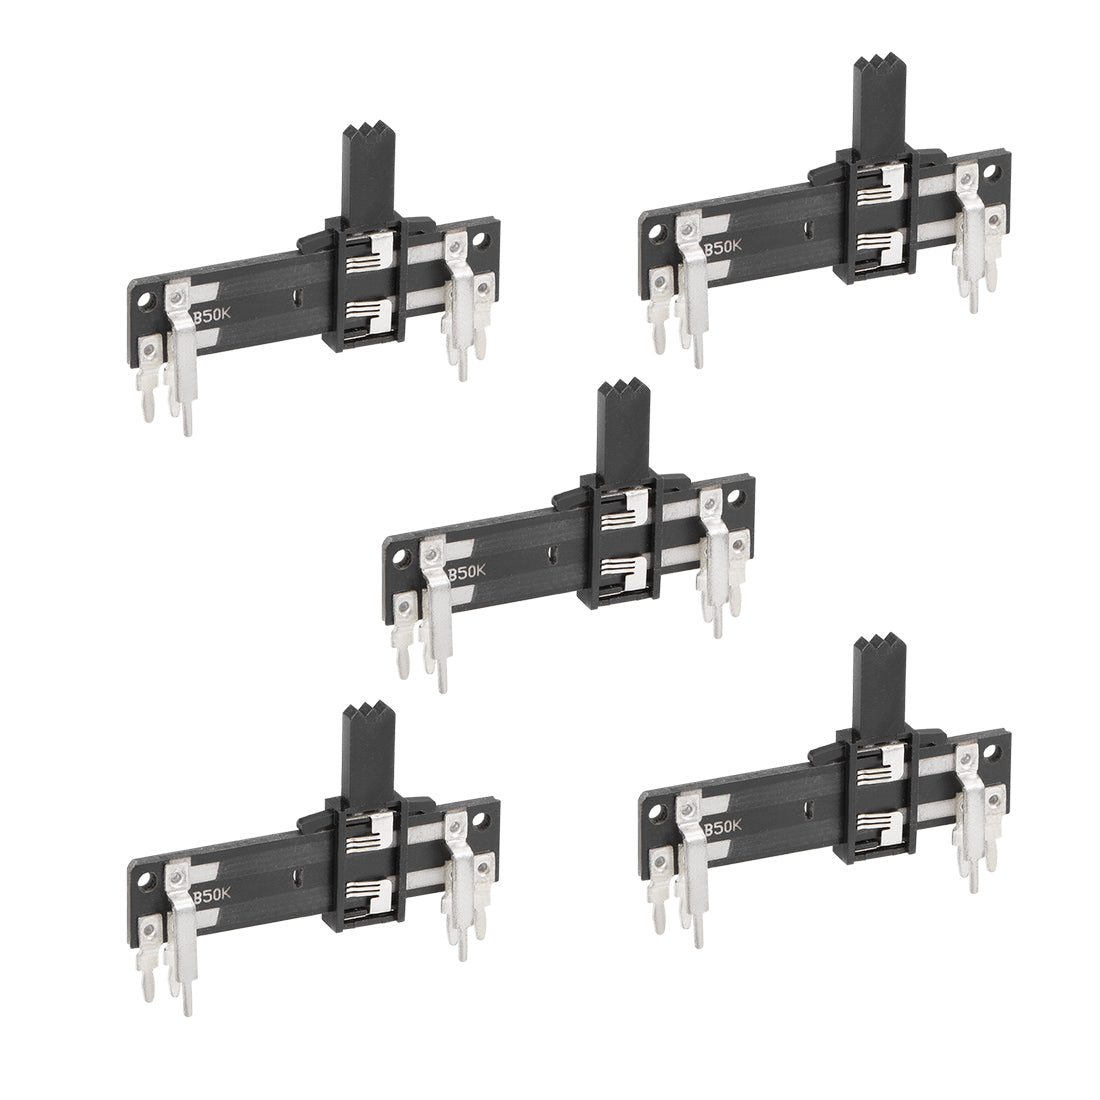 uxcell Uxcell 5pcs Fader Variable Resistors Mixer 40mm Straight Slide Potentiometer B50K Ohm Linear Double Potentiometers For Dimming Tuning